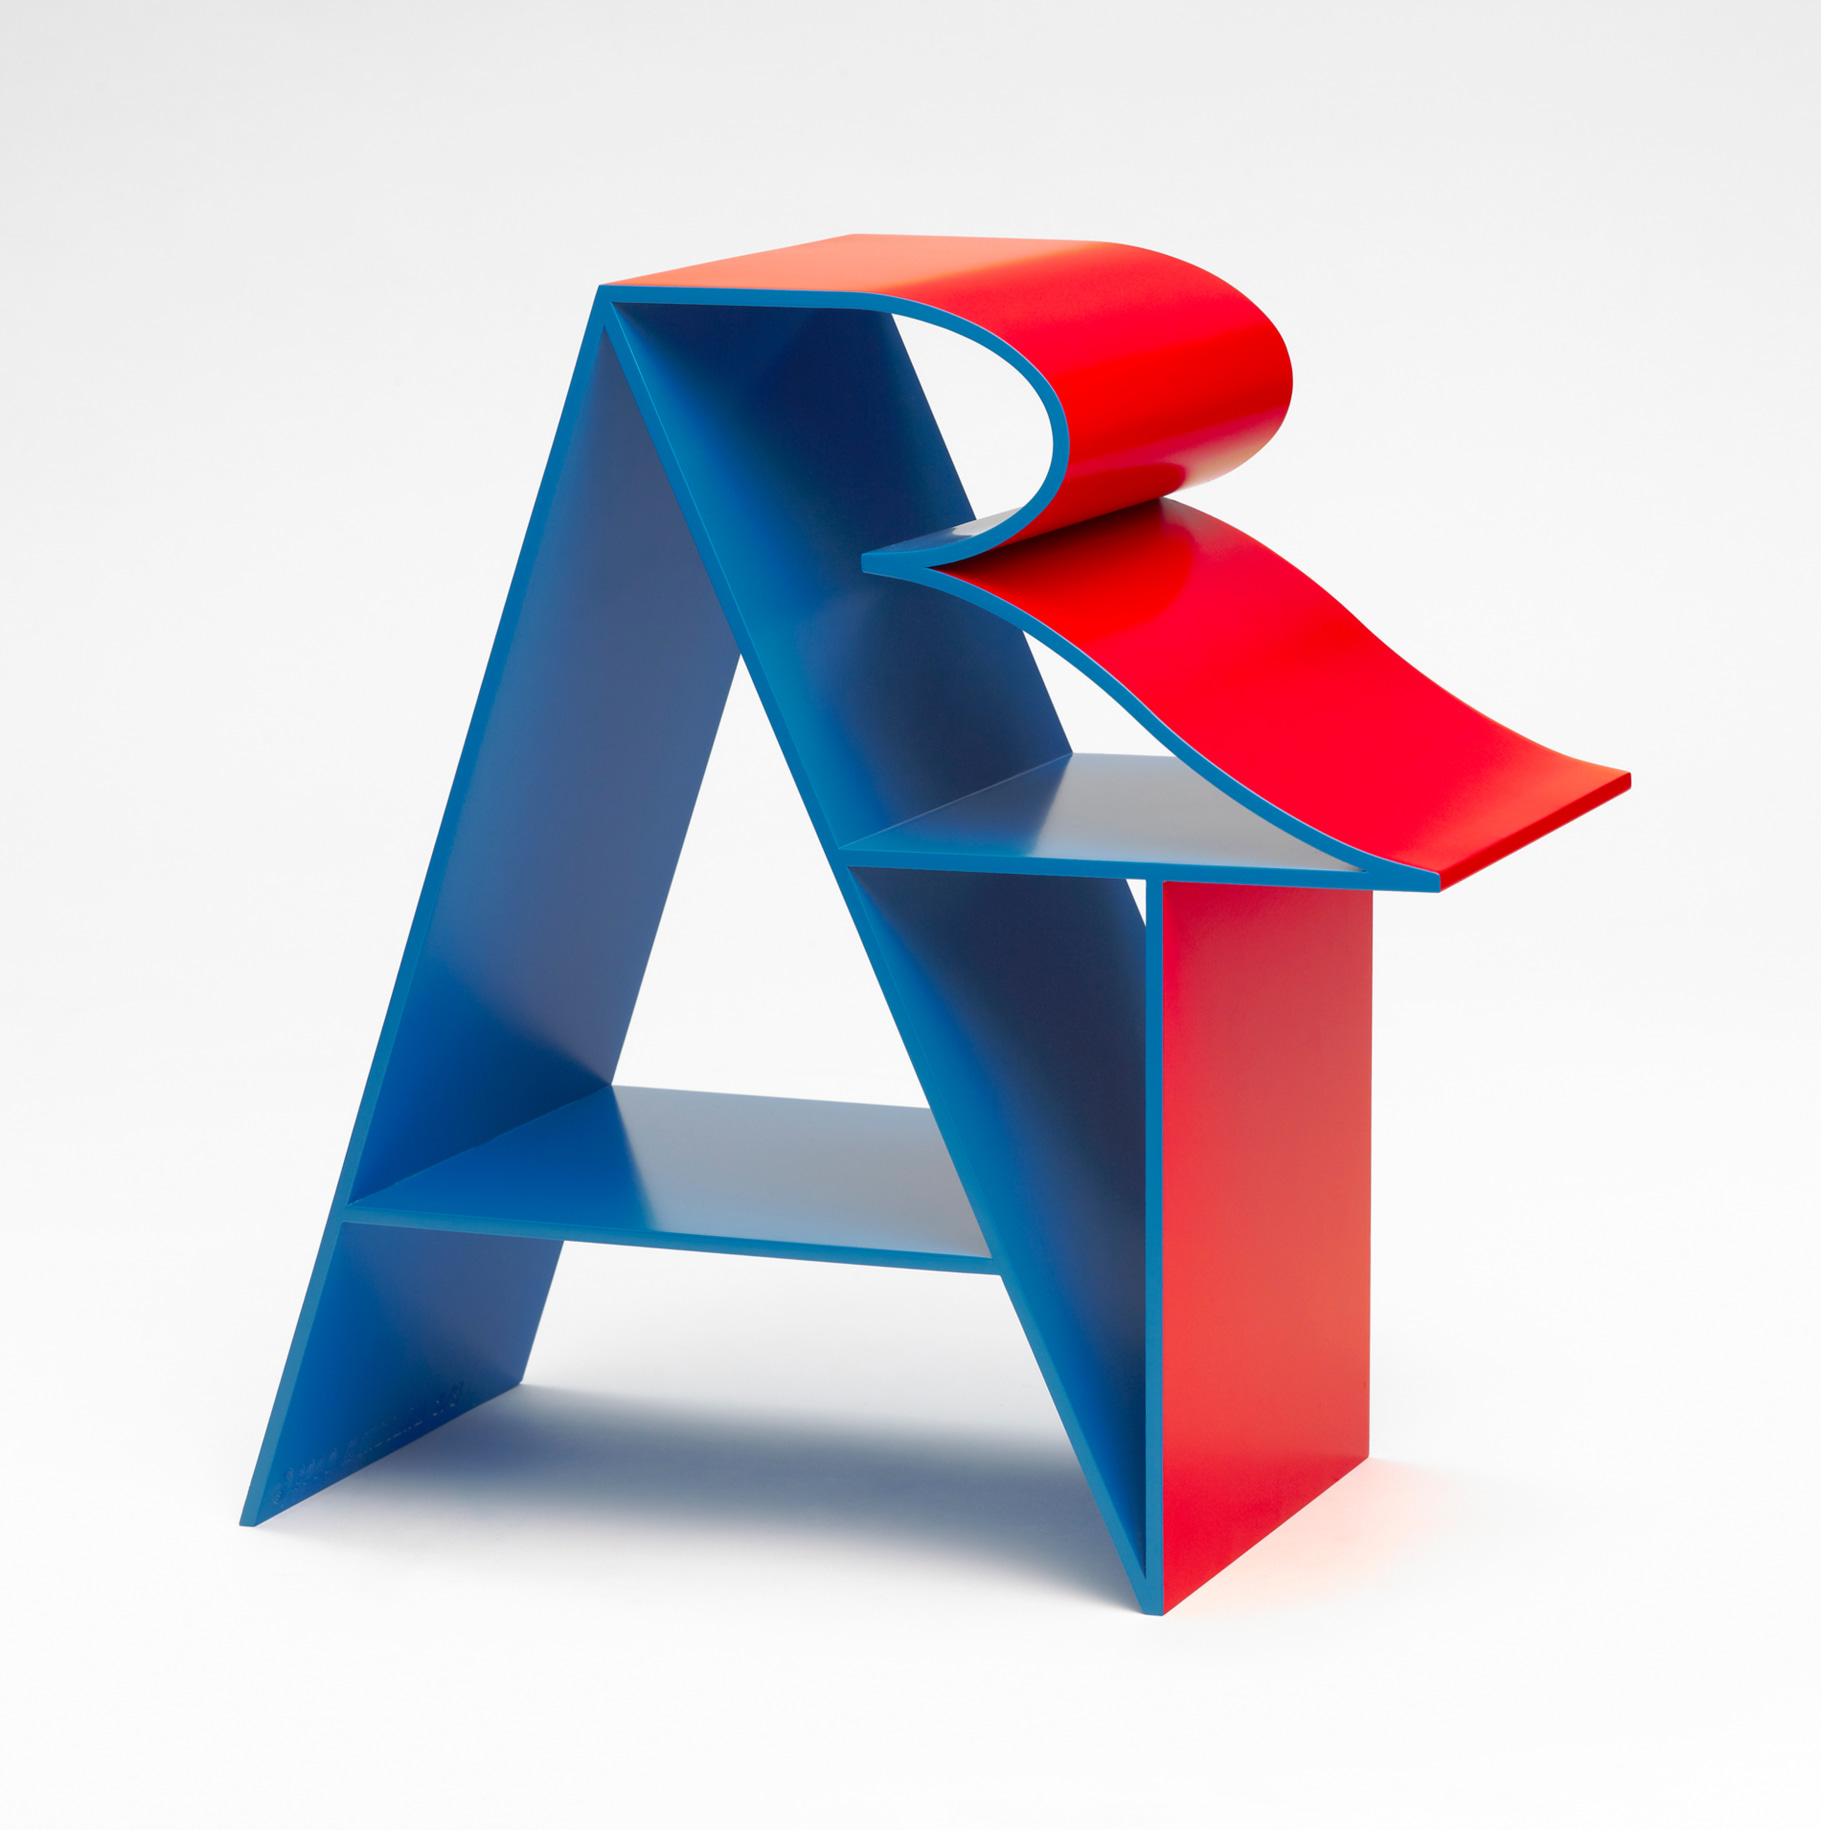 ART is an 18 by 18 by 9 inch blue and red polychrome aluminum sculpture. The letter &quot;A&rdquo; forms a supporting structure that the &ldquo;R&rdquo; and &ldquo;T&rdquo; lean against.